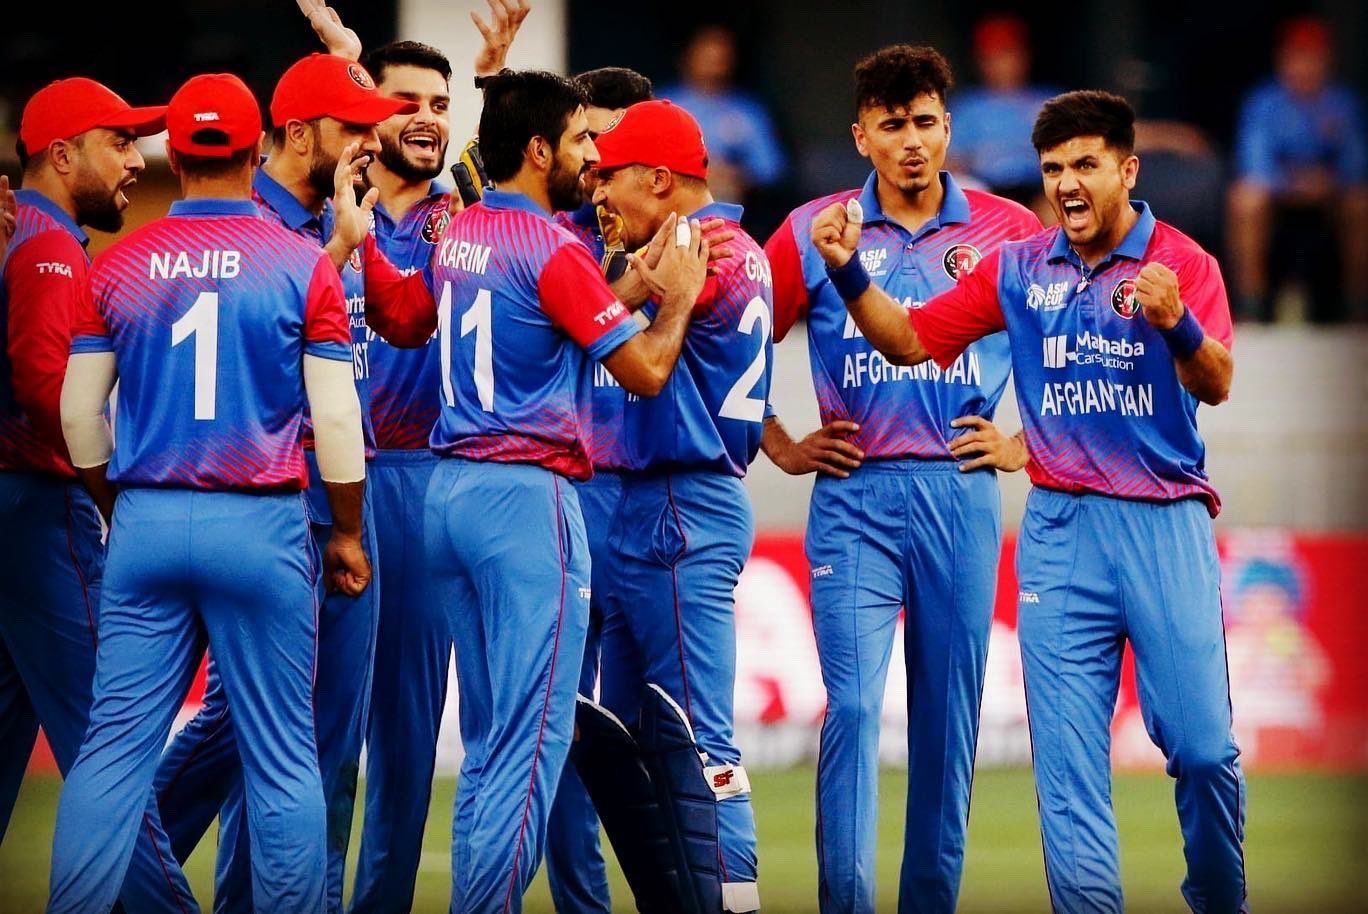 Afghanistan beat Sri Lanka for the second time in the Asia Cup.